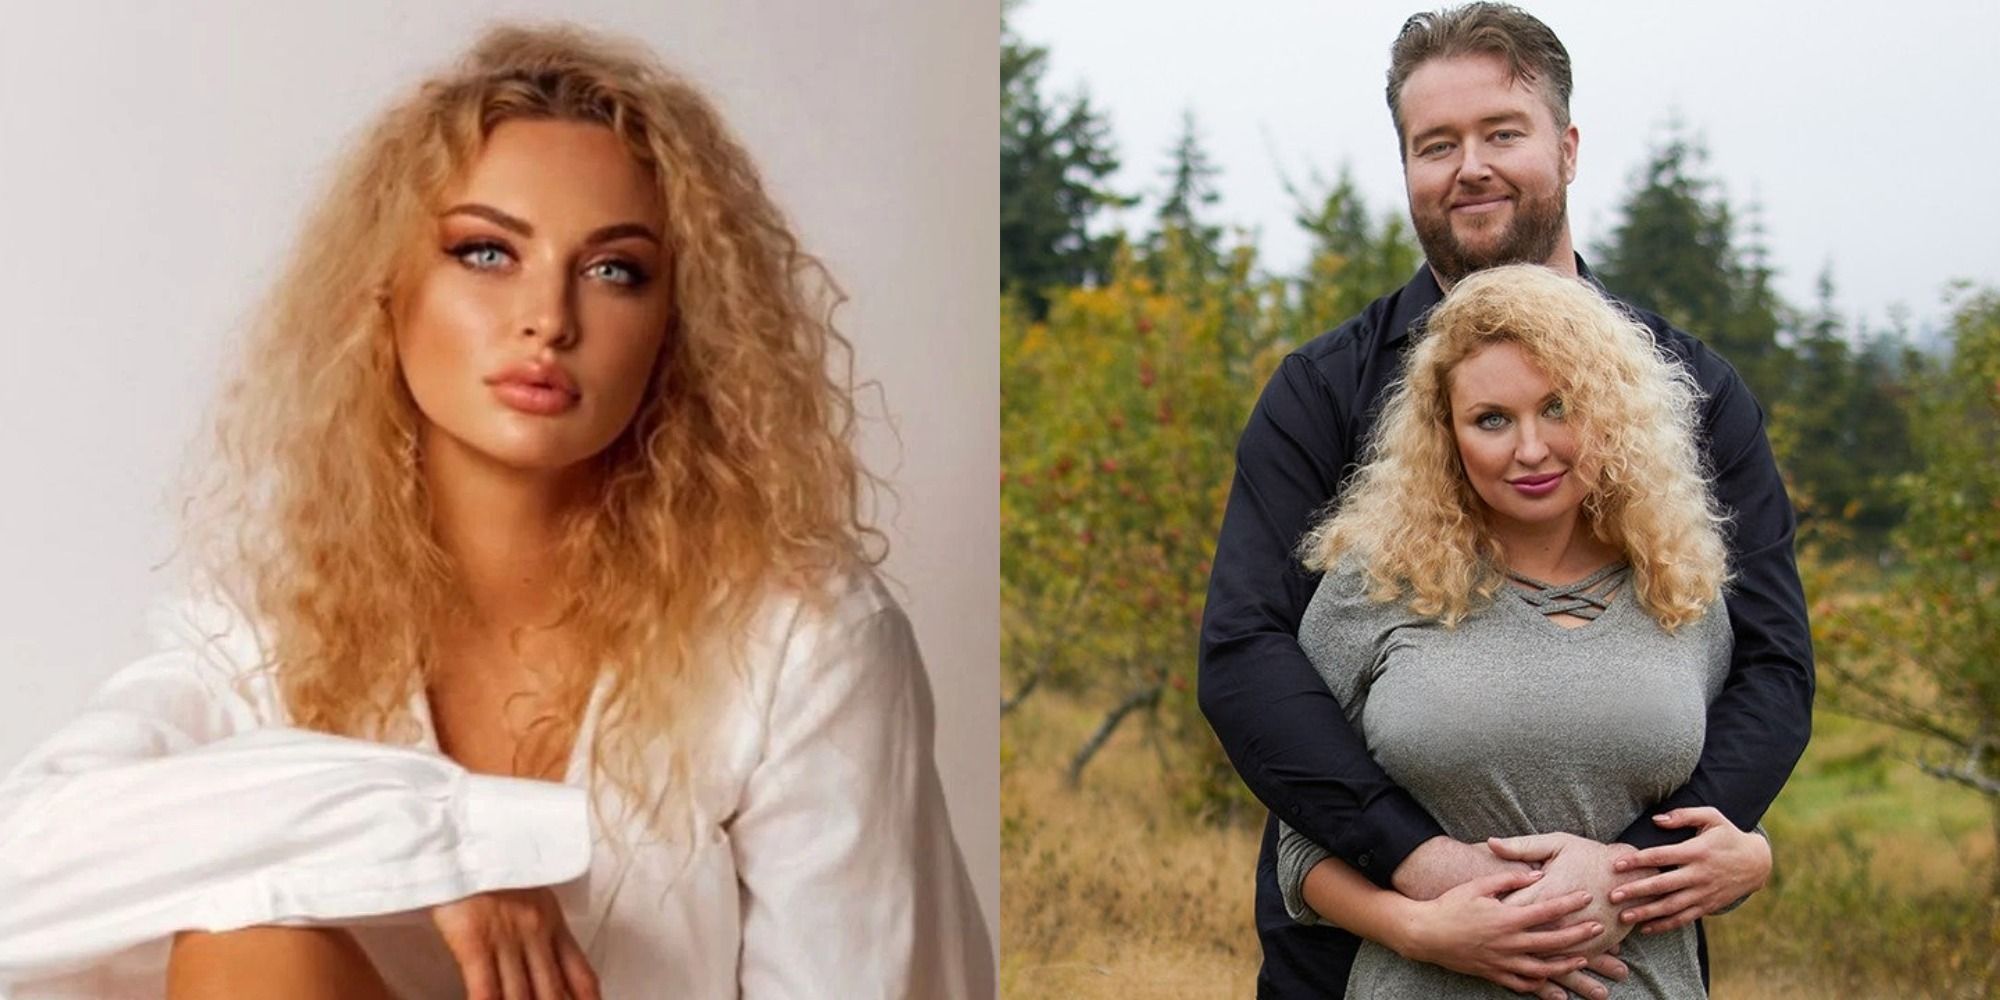 Split image showing Natalie alone and with Mike in 90 Day Fiancé.